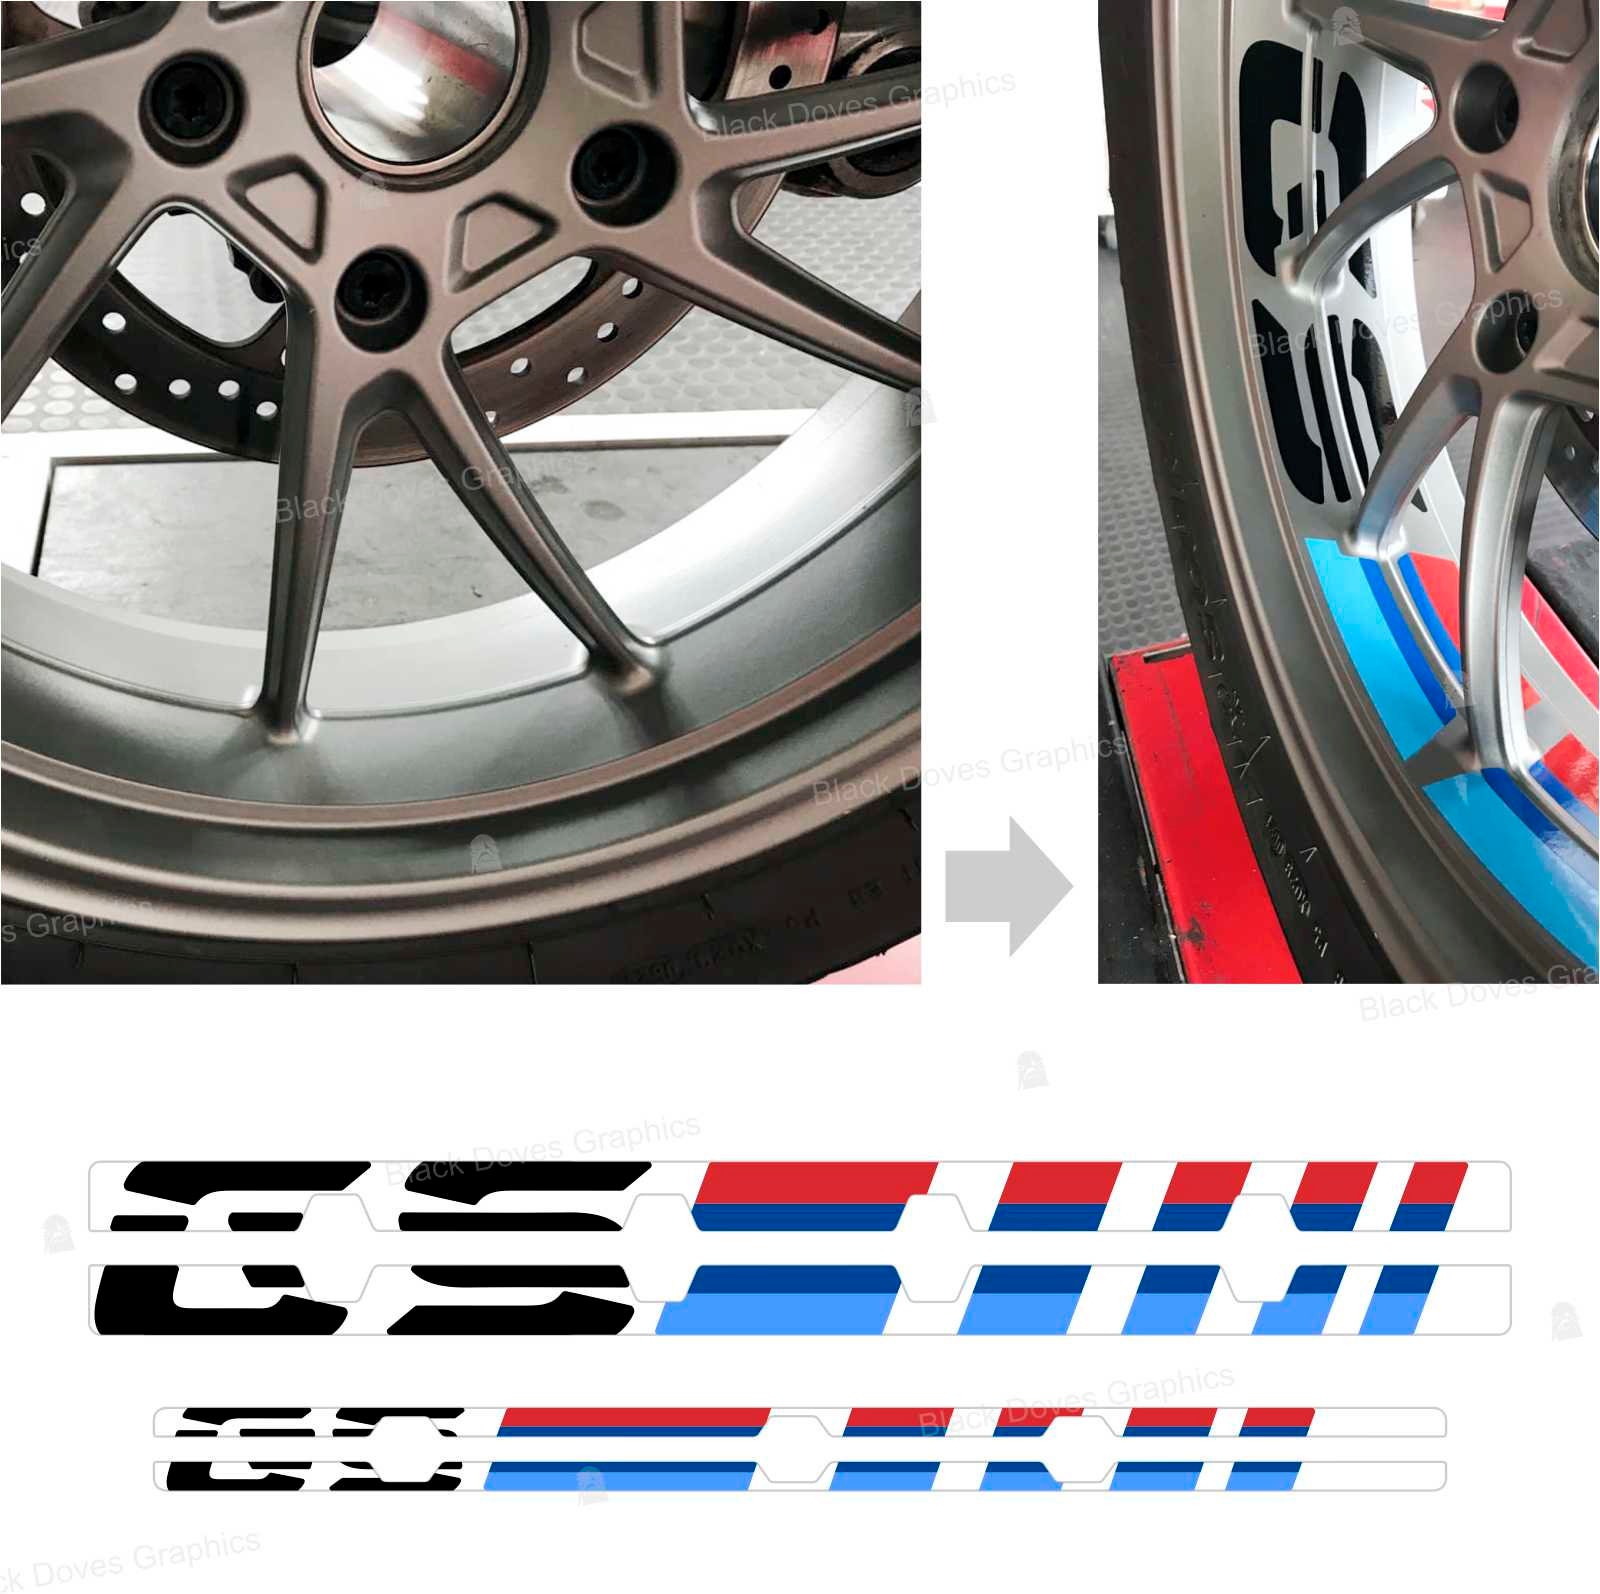 6x Stickers Compatible With R1200RT BMW Motorrad Stickers Pegatina